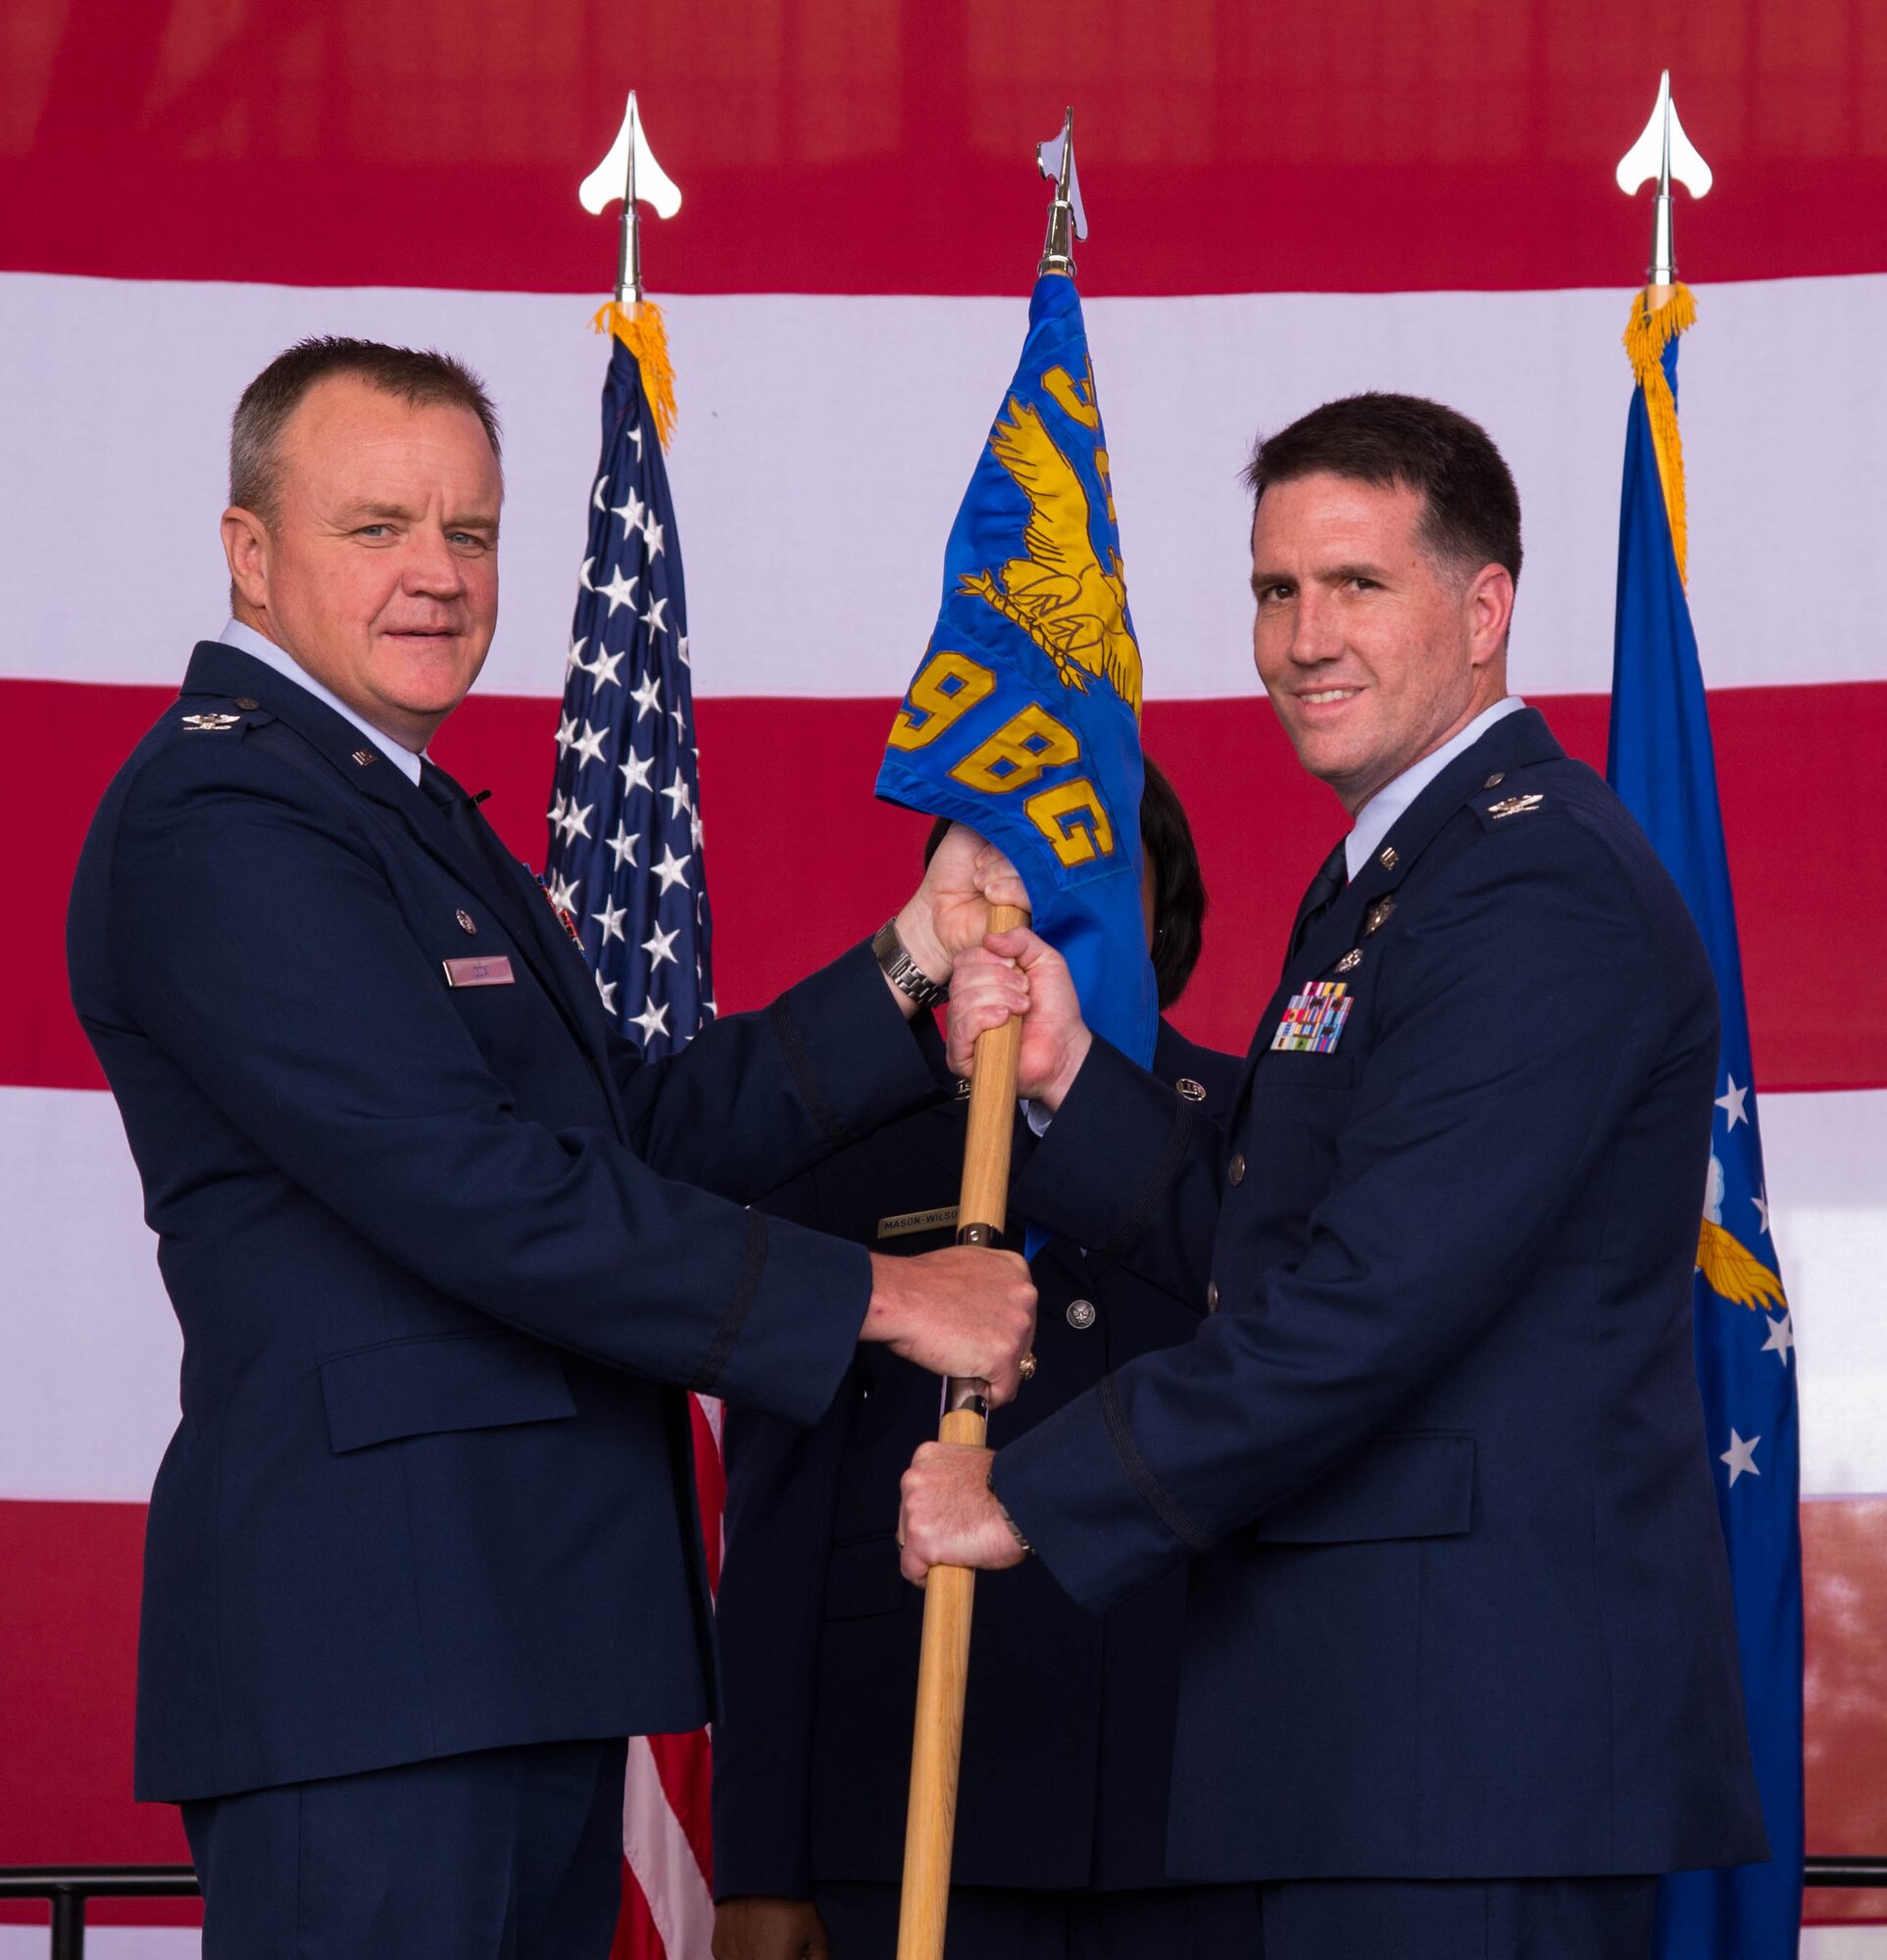 Col. Bruce Cox, 307th Bomb Wing commander, presents the guidon of the 489th Bomb Group to Col. Michael McClanahan during a change of command ceremony at Dyess Air Force Base, Texas, June 3, 2017. This is the unit’s first change of command since it was reactivated in 2015. (U.S. Air Force photo by Staff Sgt. Jason McCasland/Released)